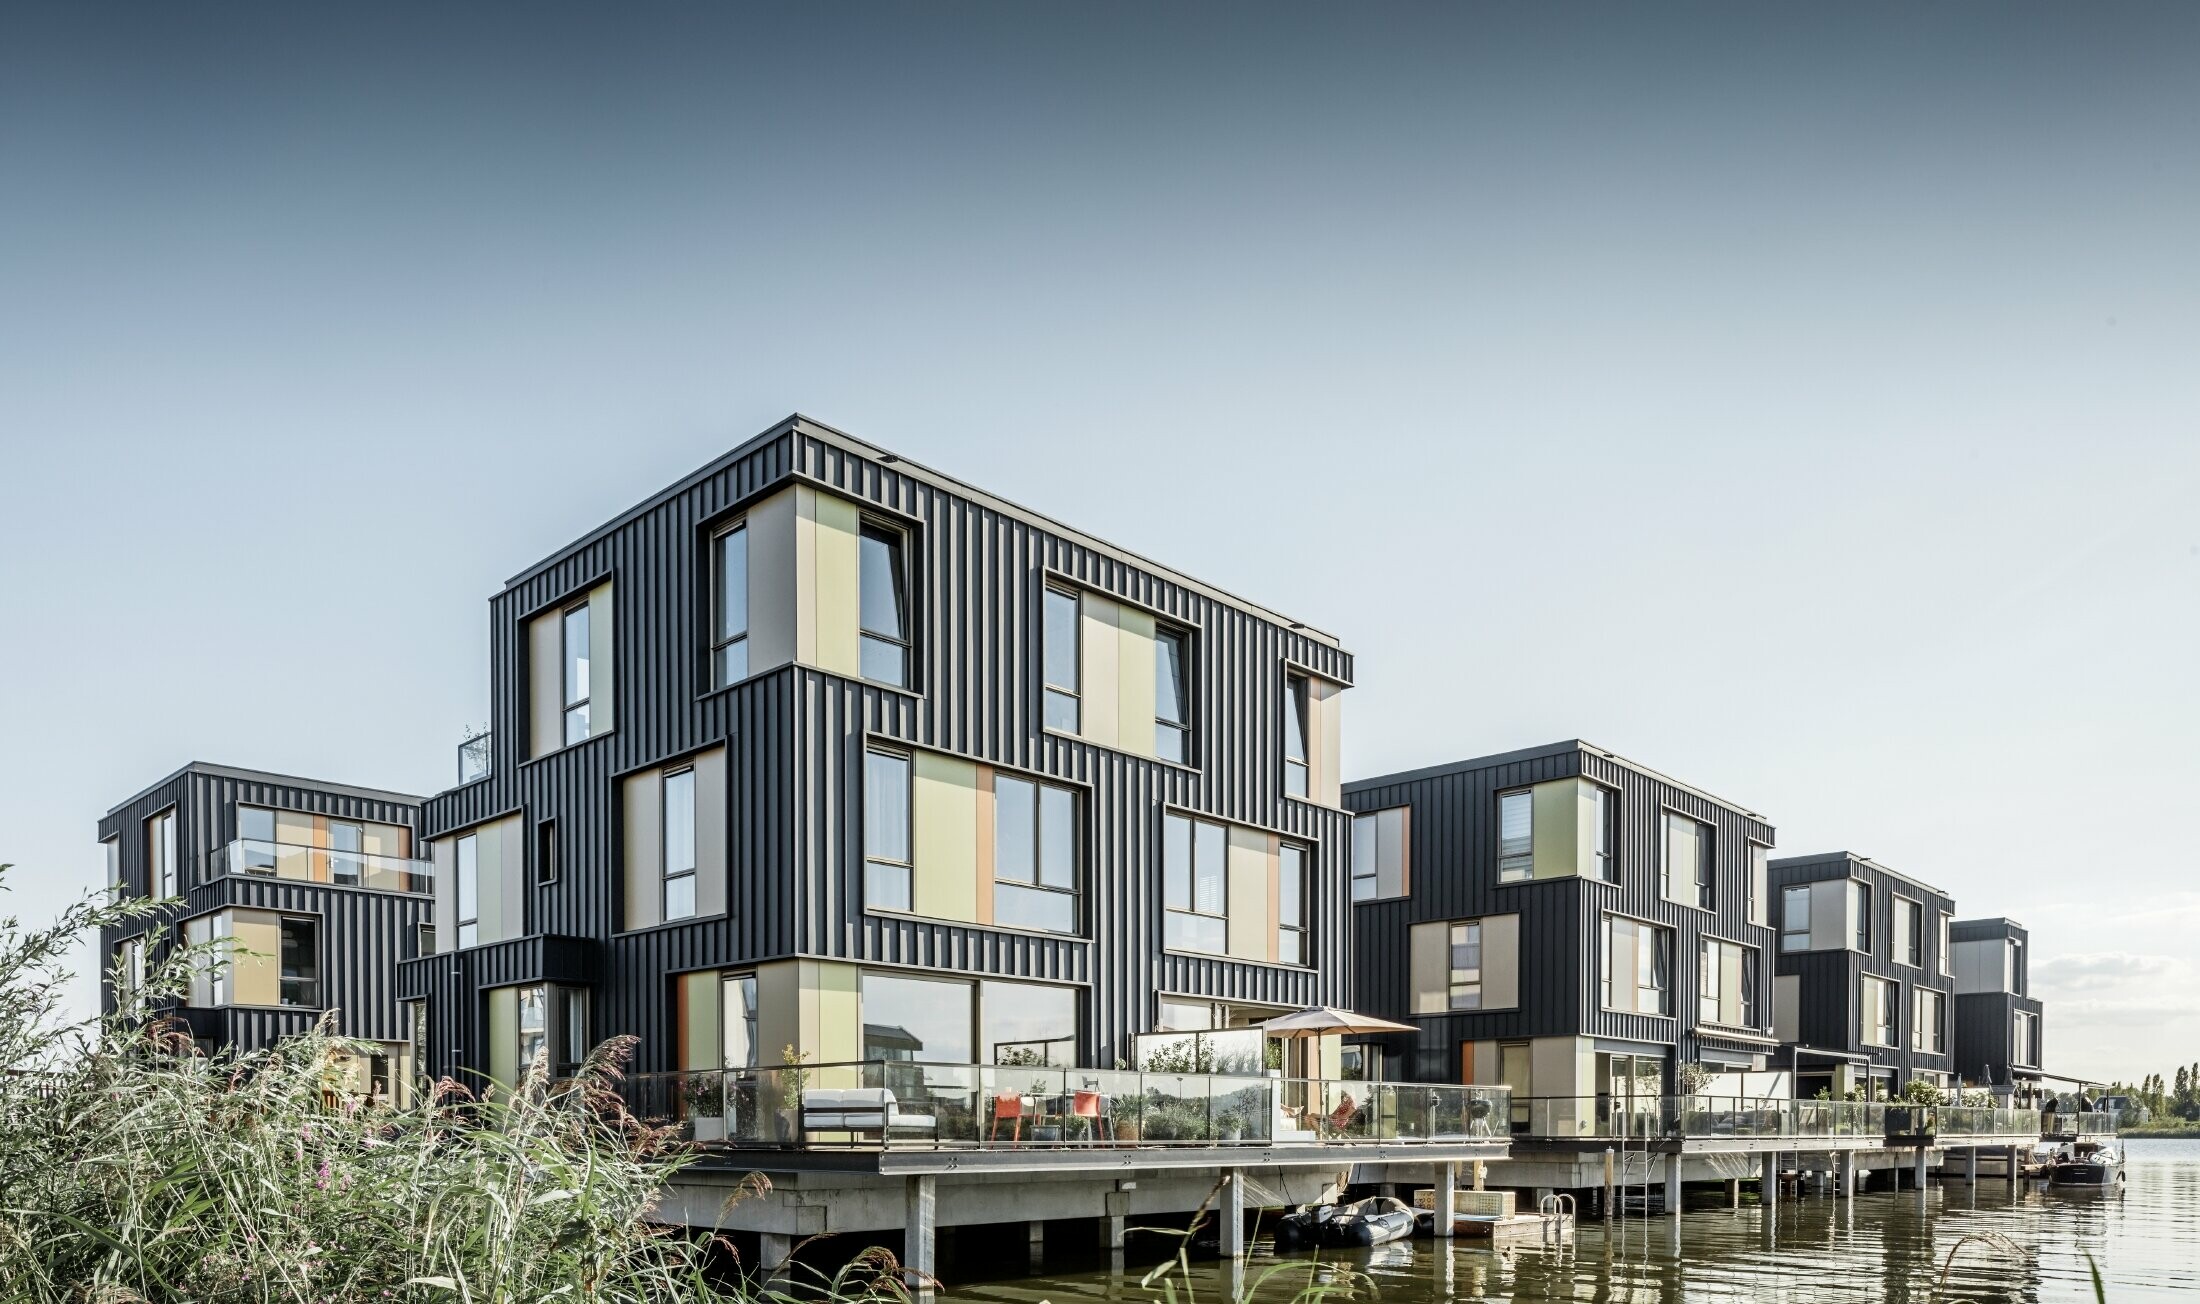 New residential development with semi-detached houses on a lake in Amsterdam. The houses were clad in PREFA Prefalz in P.10 anthracite.